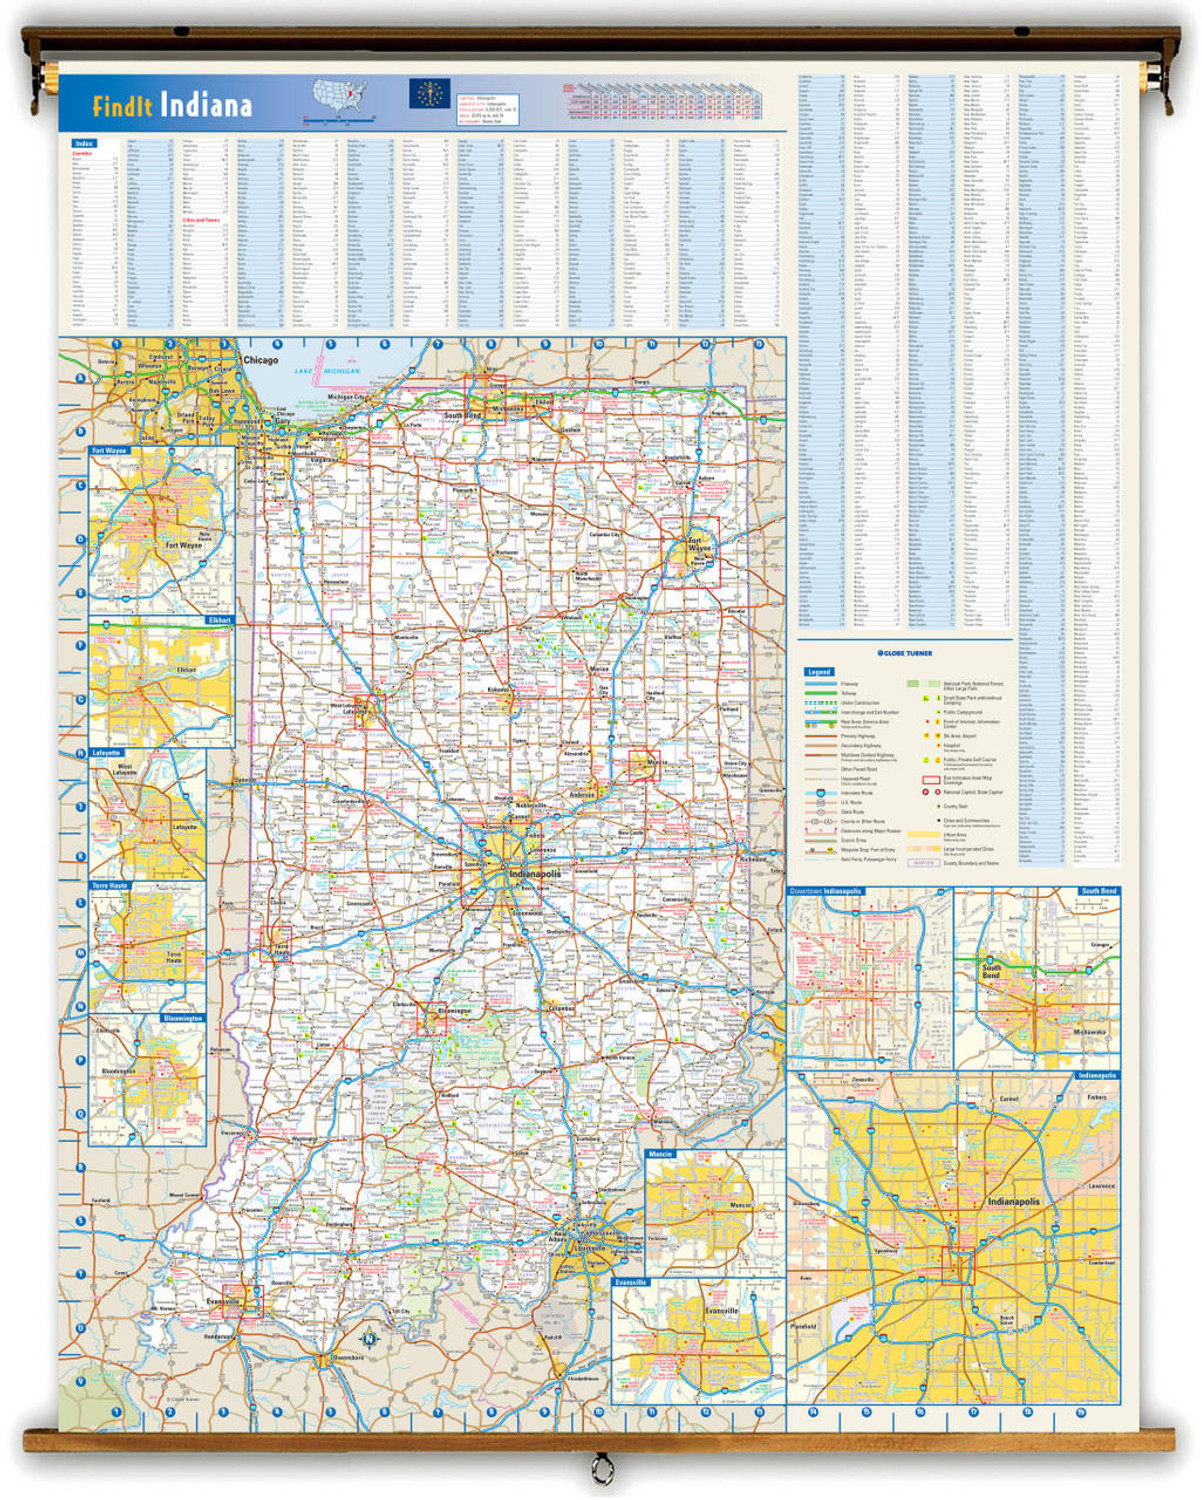 Indiana Reference Pull-Down Map, image 1, World Maps Online